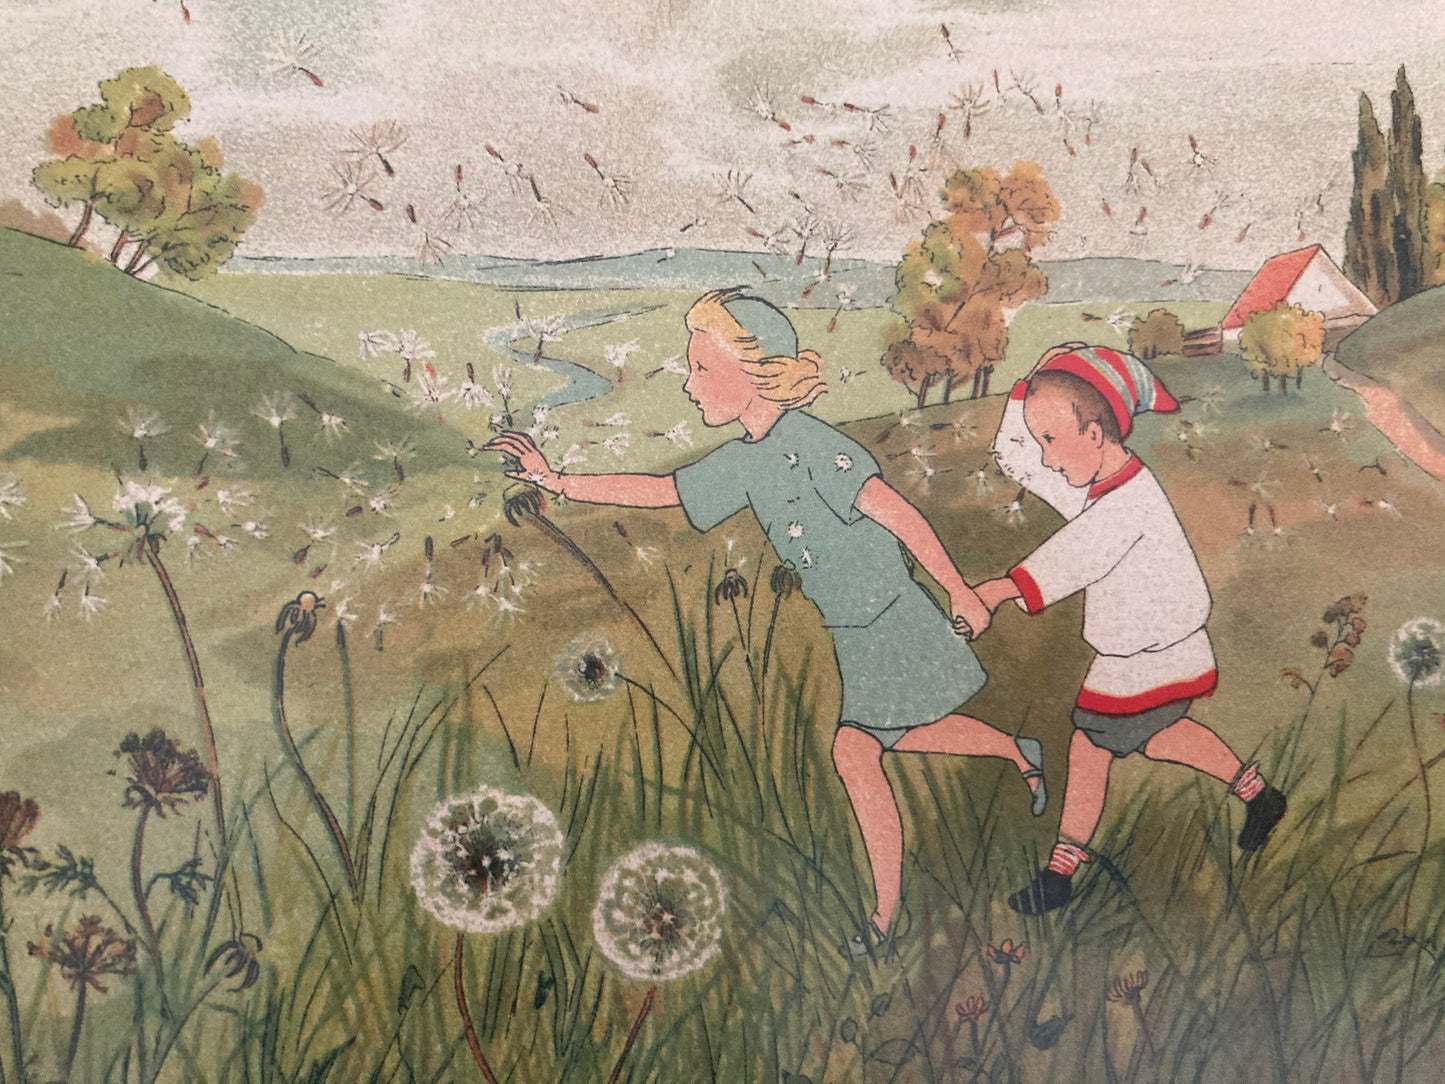 Children's Picture Book - THE STORY OF THE WIND CHILDREN